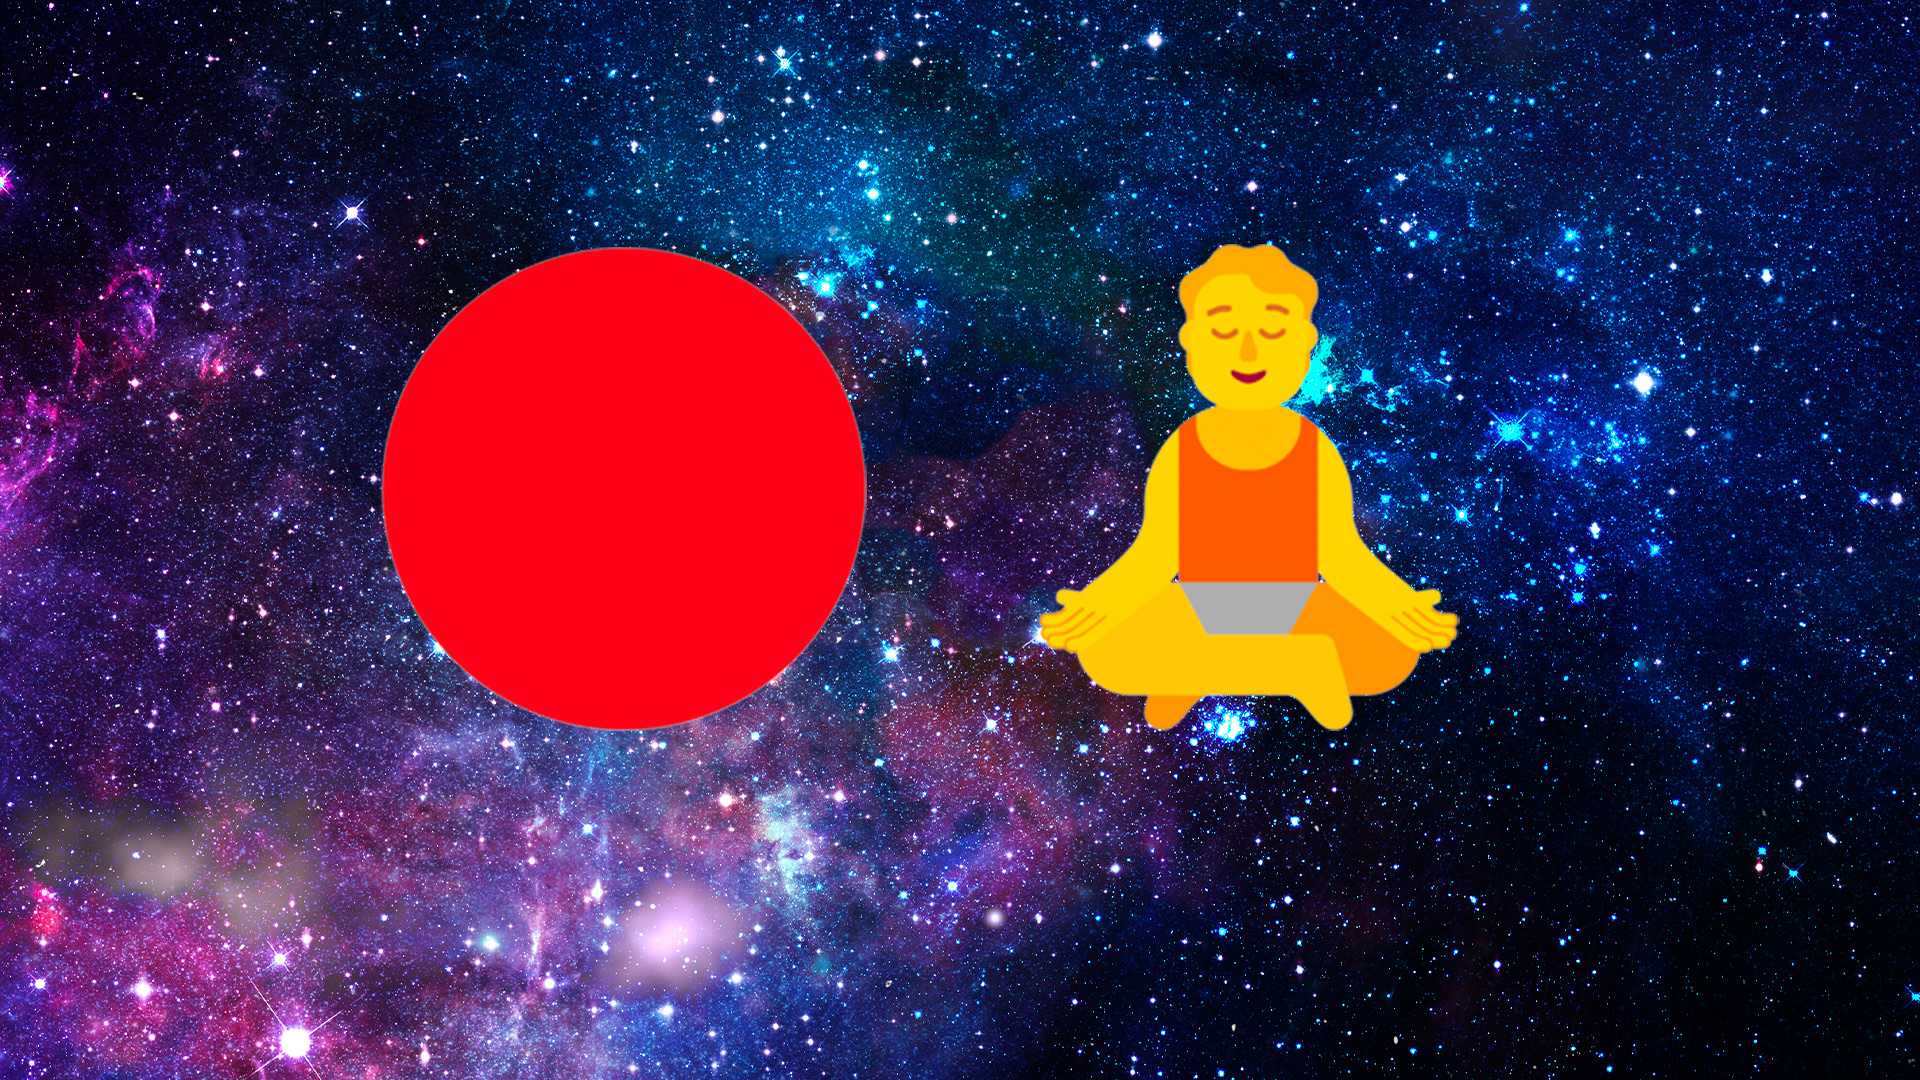 An emoji of a red circle and a person doing yoga